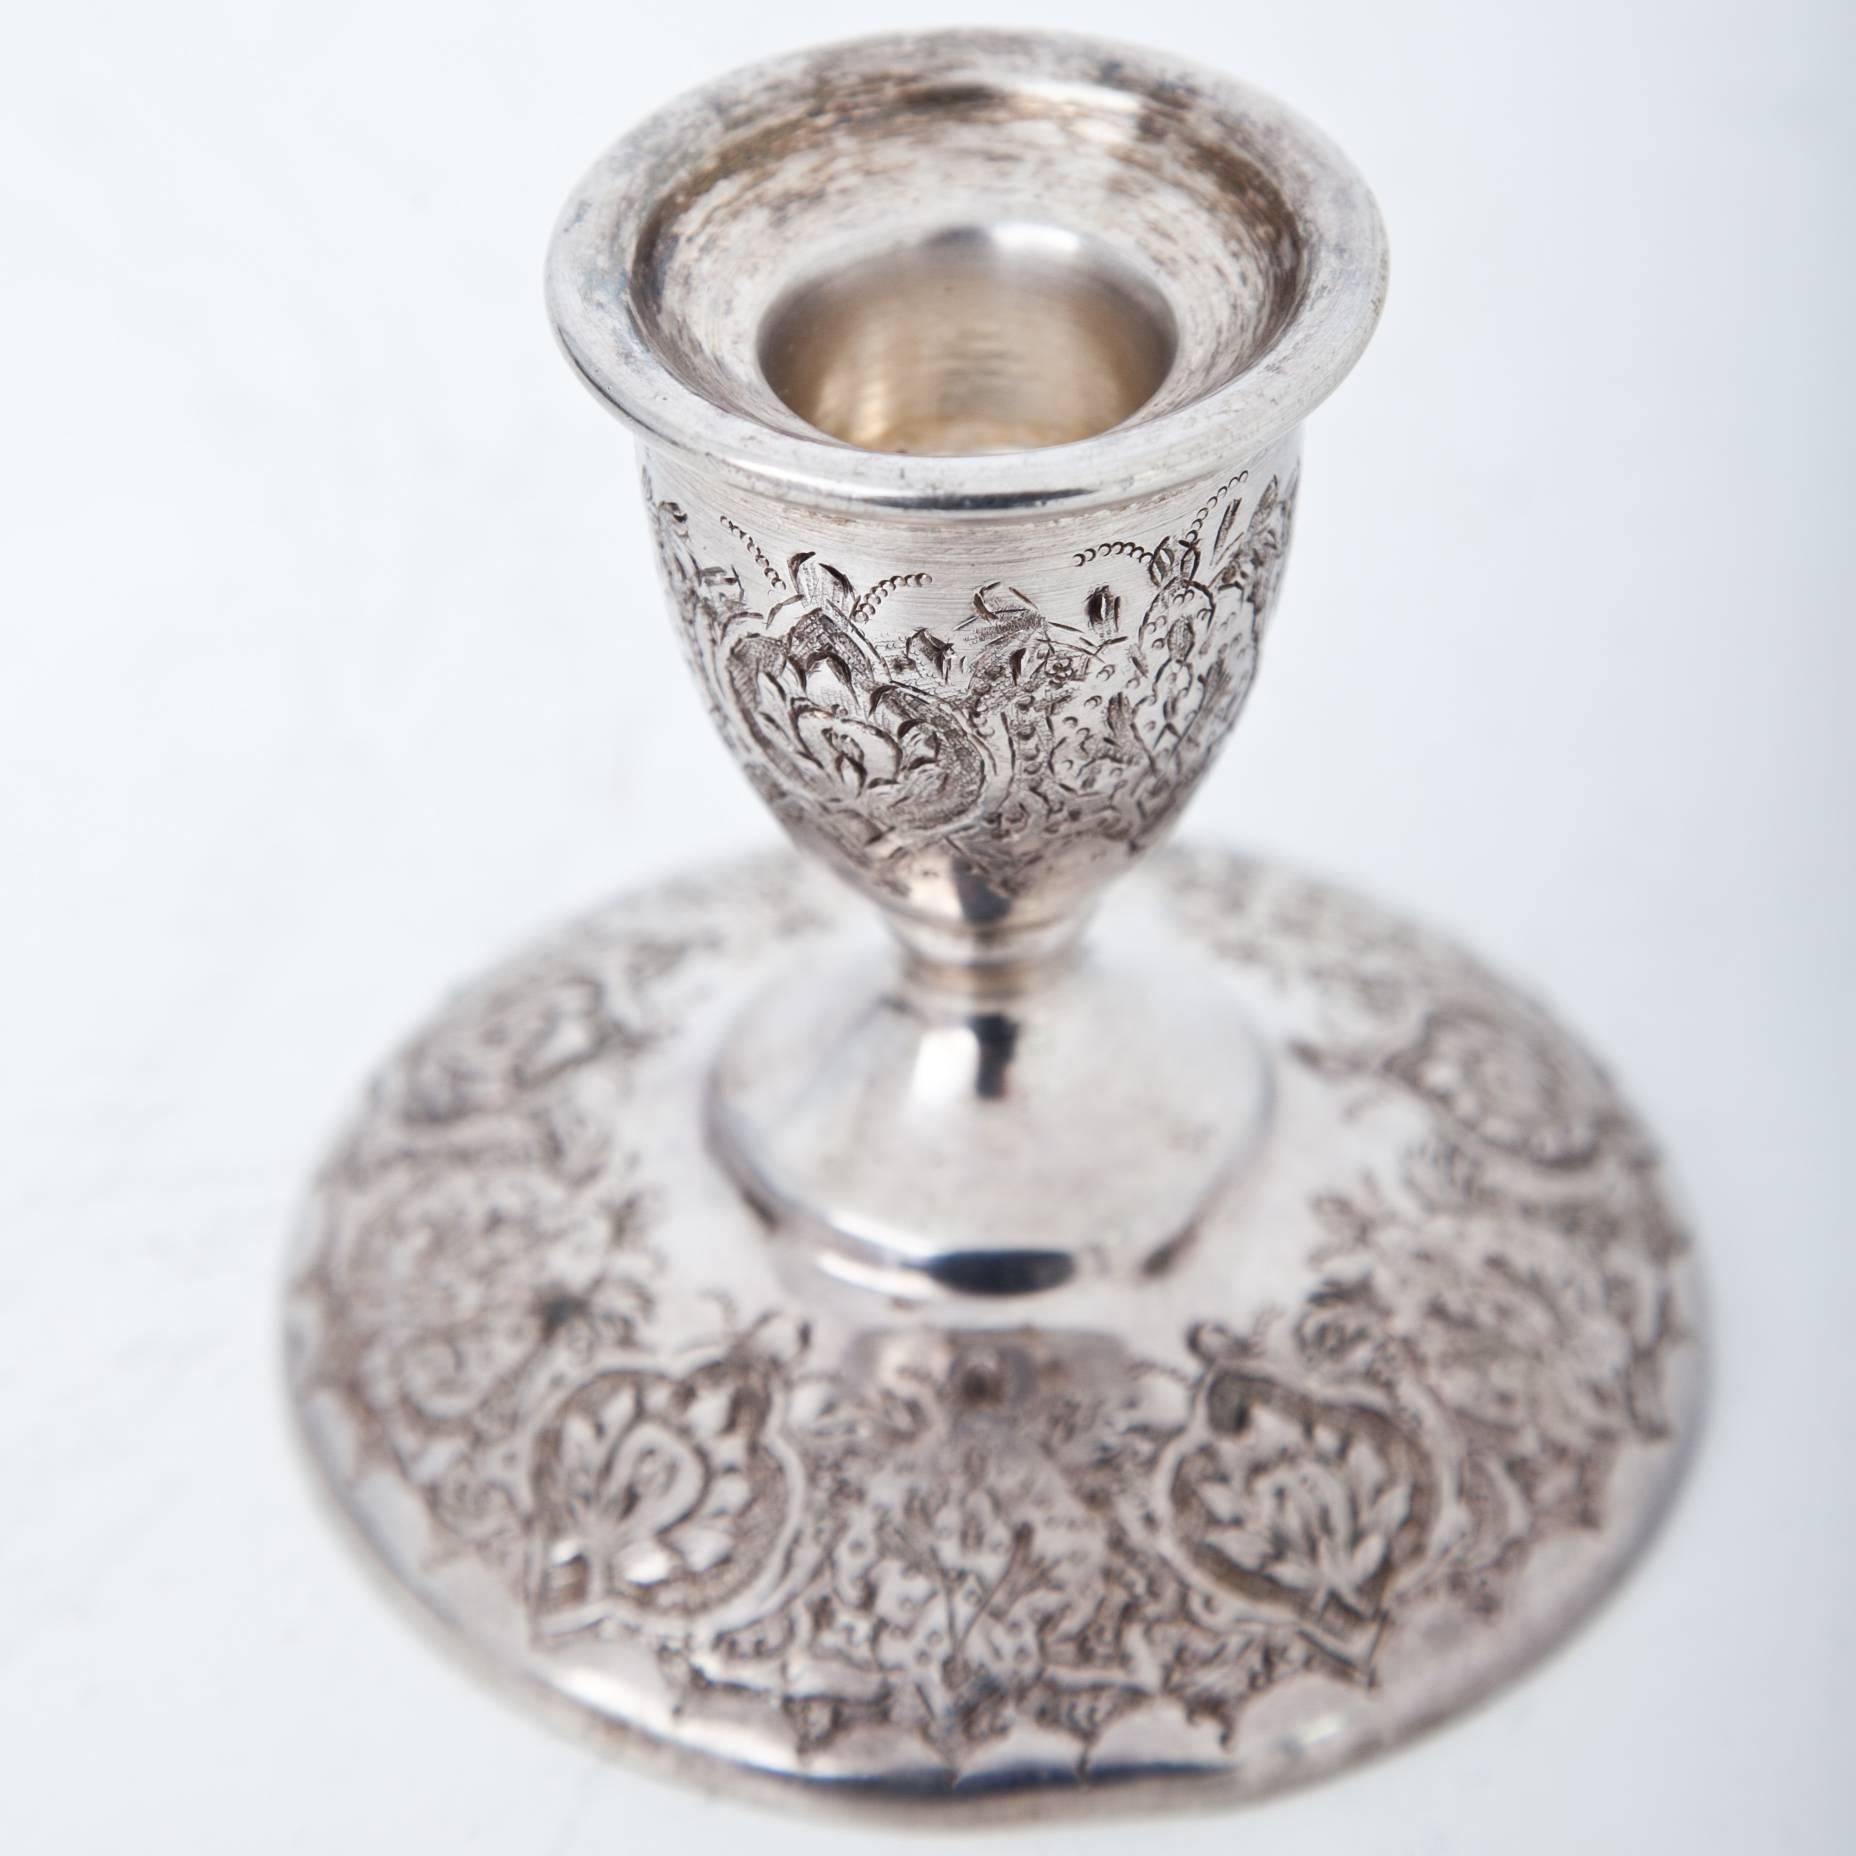 Small silver candlestick on a round foot with baluster-shaped shaft and tulip-shaped spout. The candleholder is decorated with carved flower and leaf ornaments. Illegible embossed at the foot.